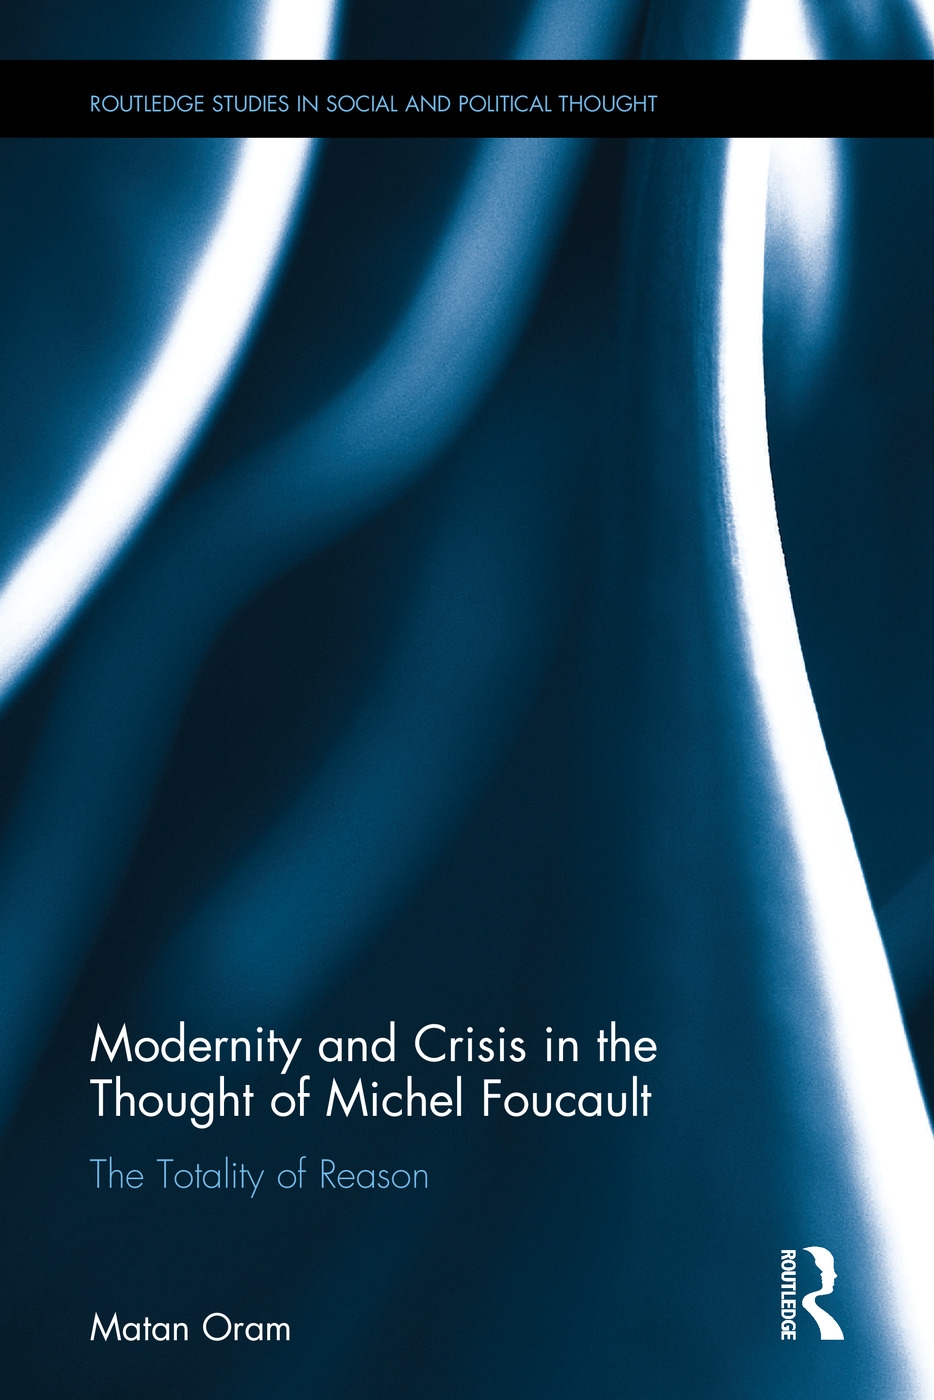 Modernity and Crisis in the Thought of Michel Foucault: The Totality of Reason